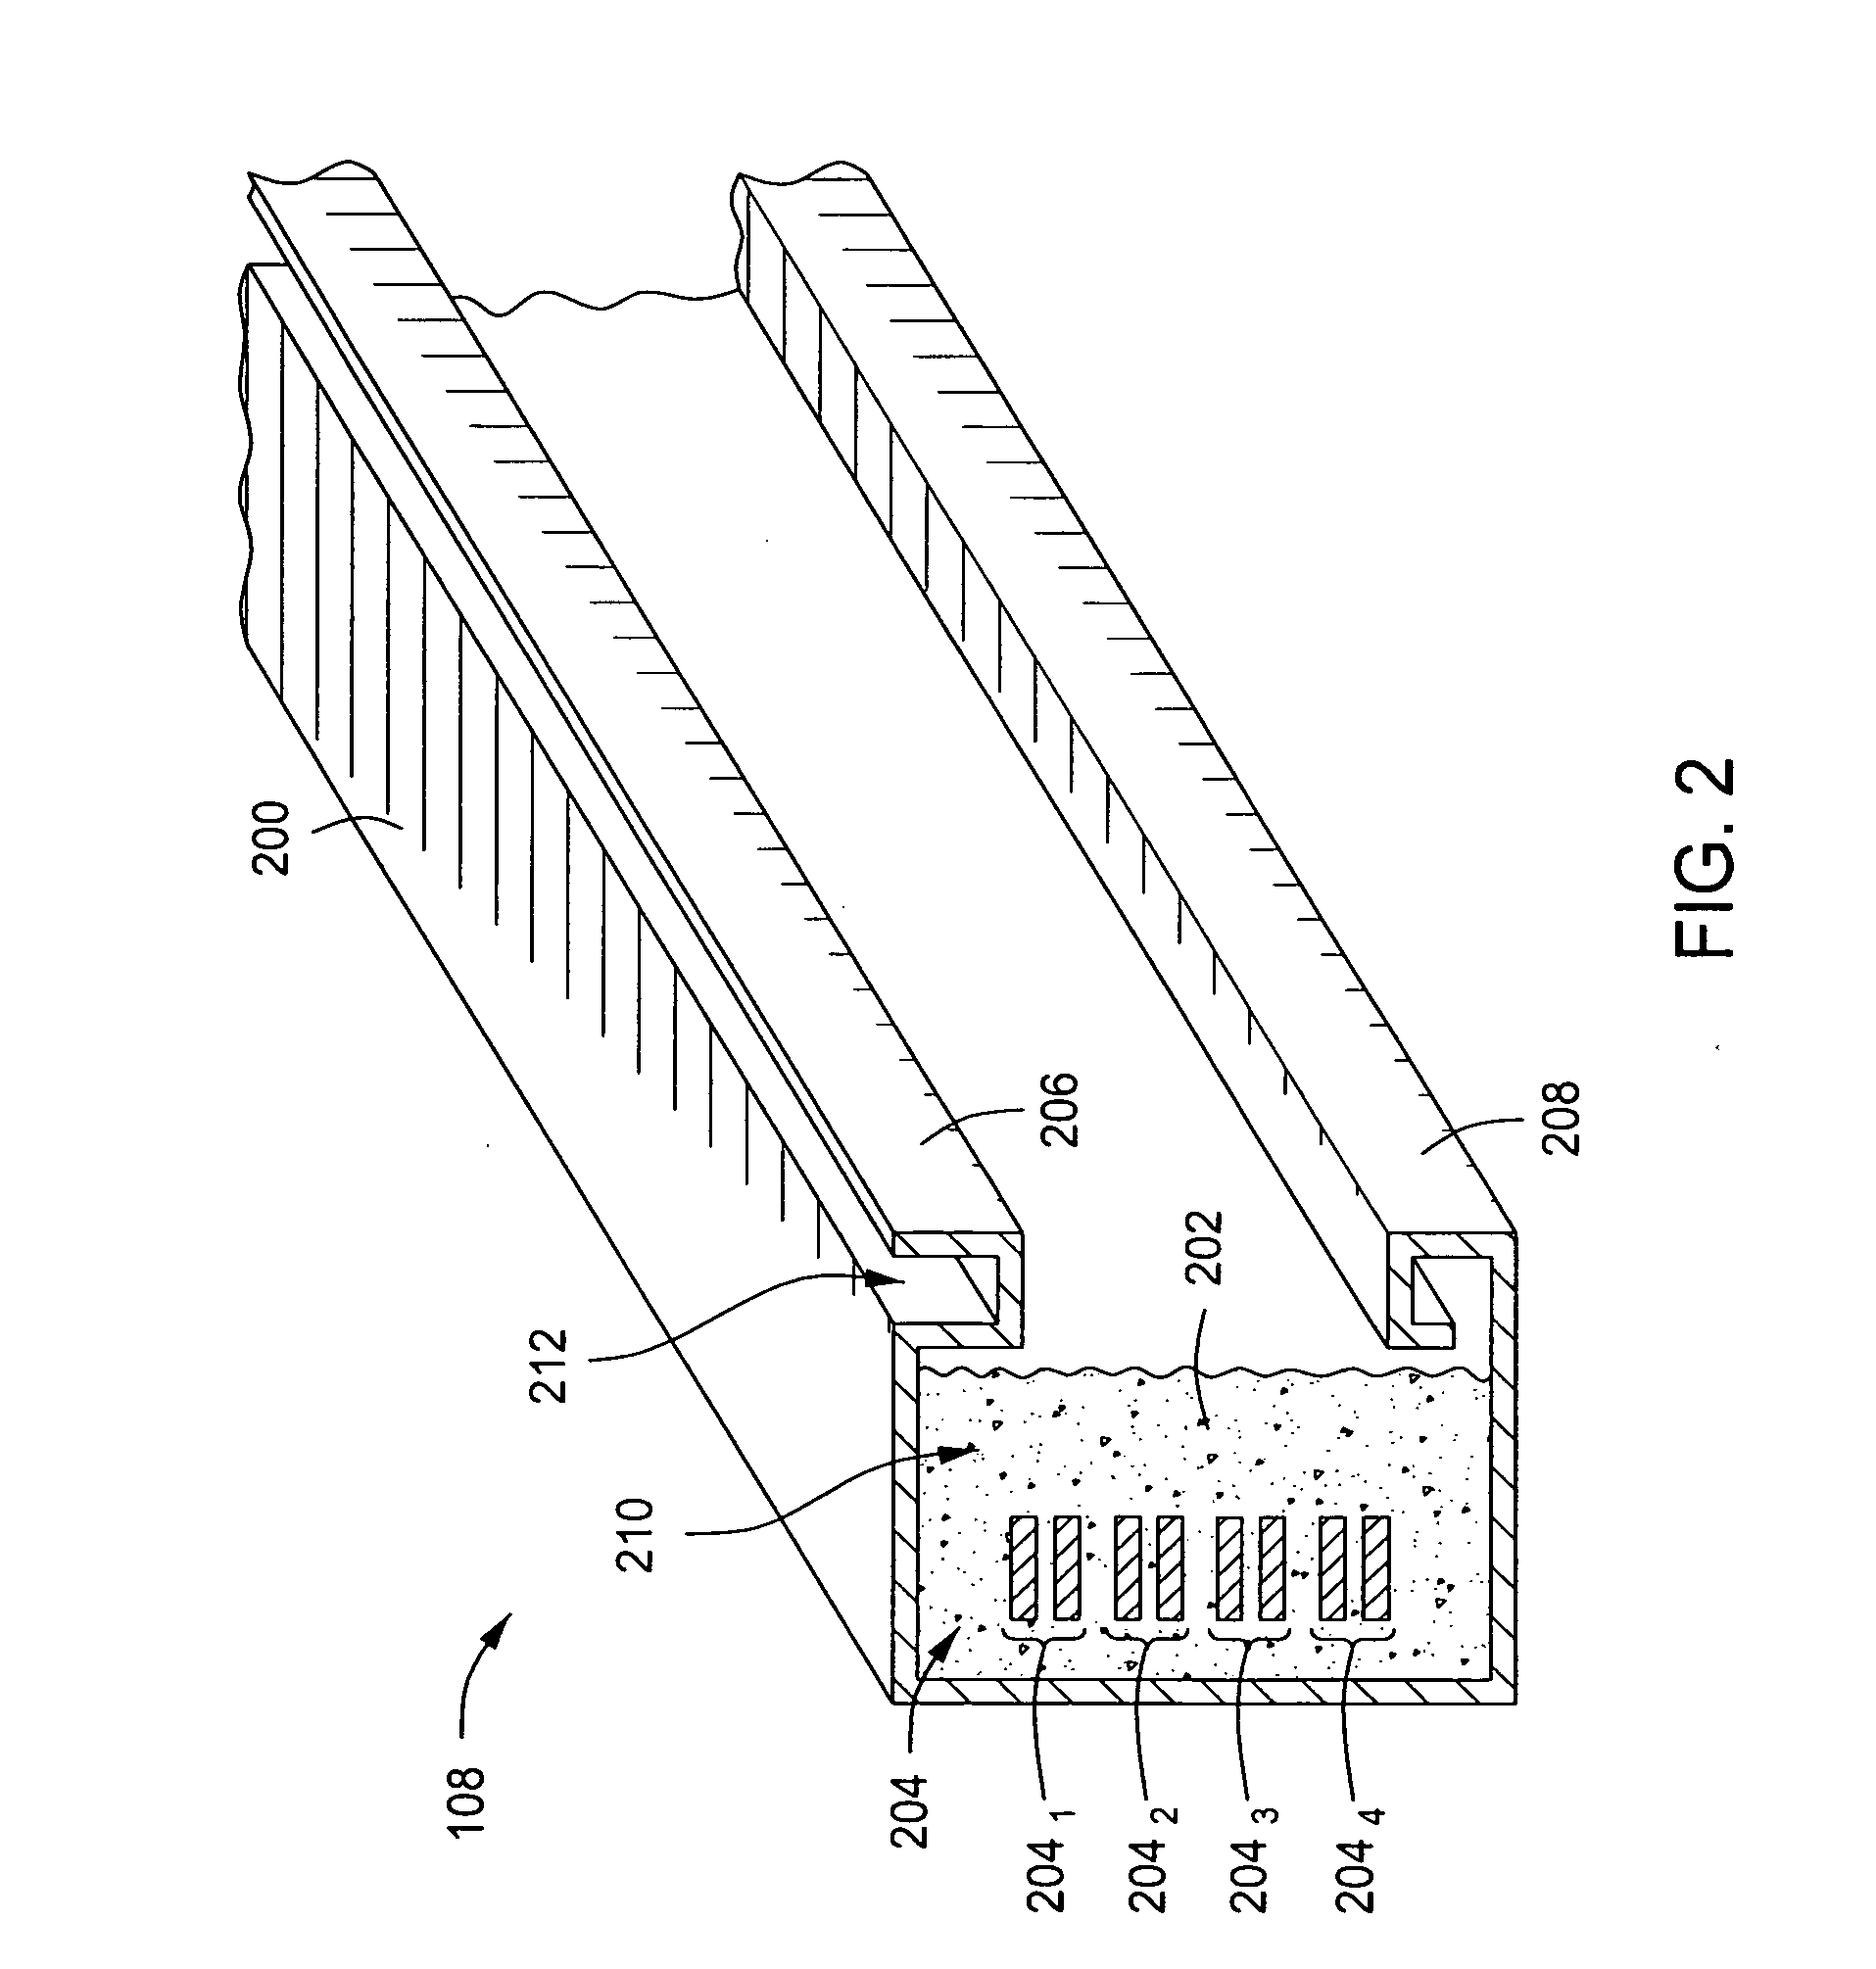 Mounting rail and power distribution system for use in a photovoltaic system